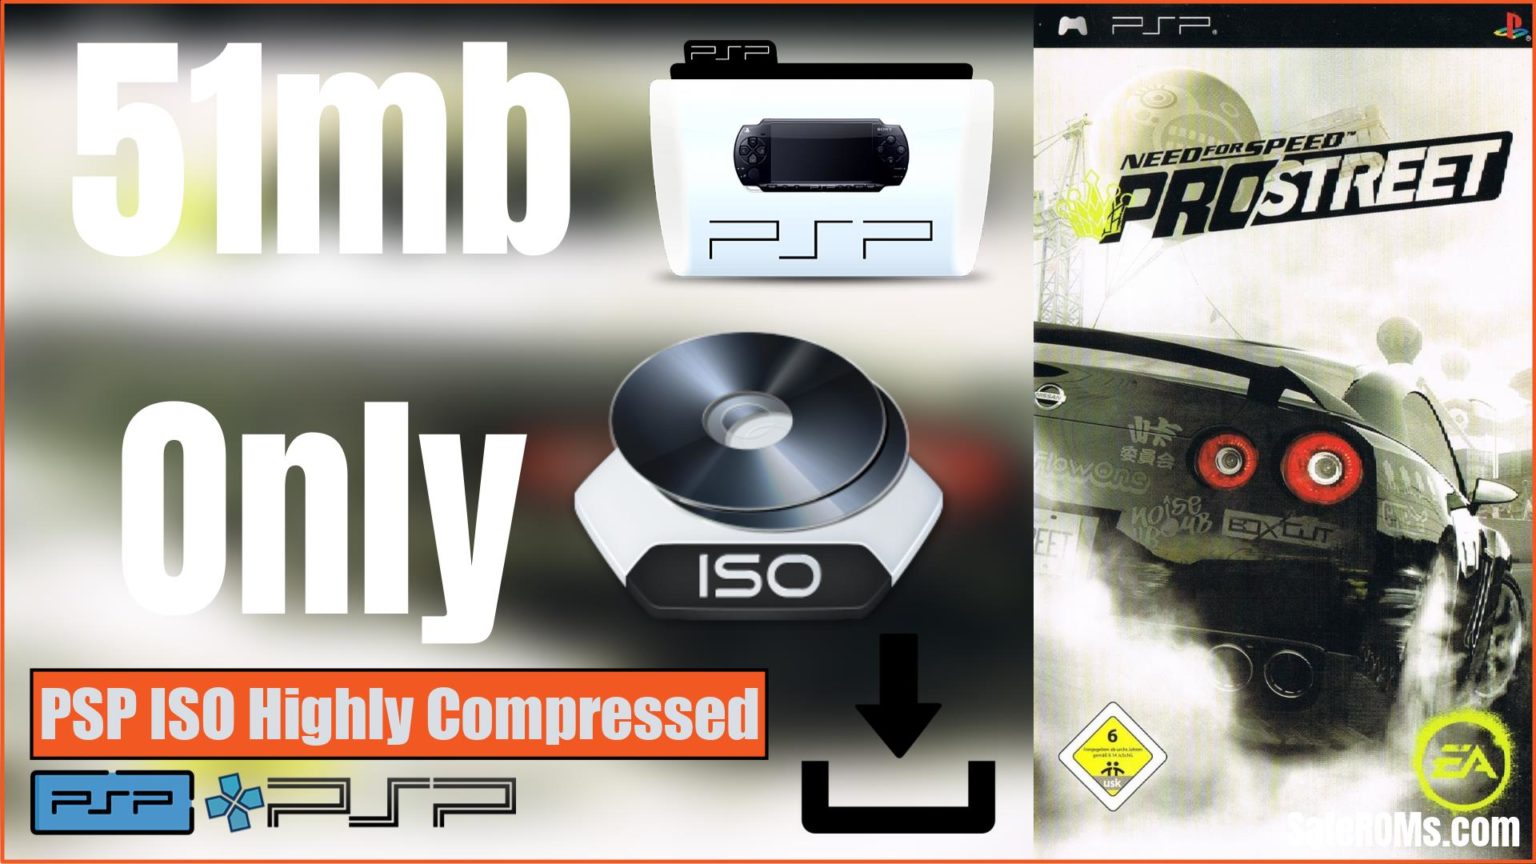 ps2 iso highly compressed